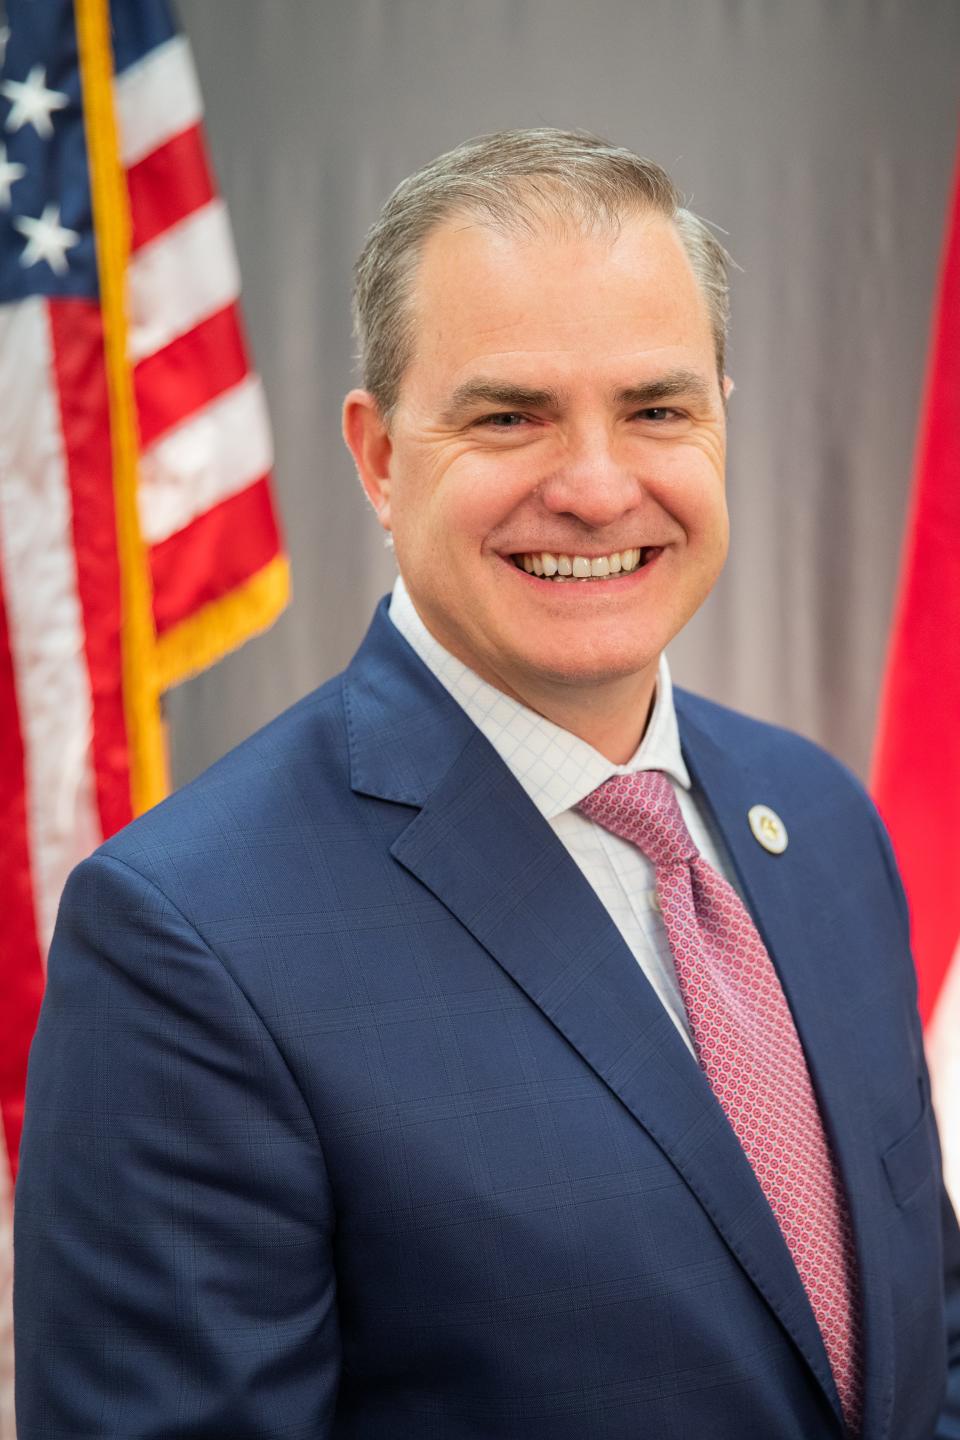 Official portrait of Georgia State Sen. Shawn Still. Still was charged Monday, Aug. 14, 2023 in an indictment alledging Donald Trump and others were part of a scheme to illegally overturn the 2020 election results in Georgia.